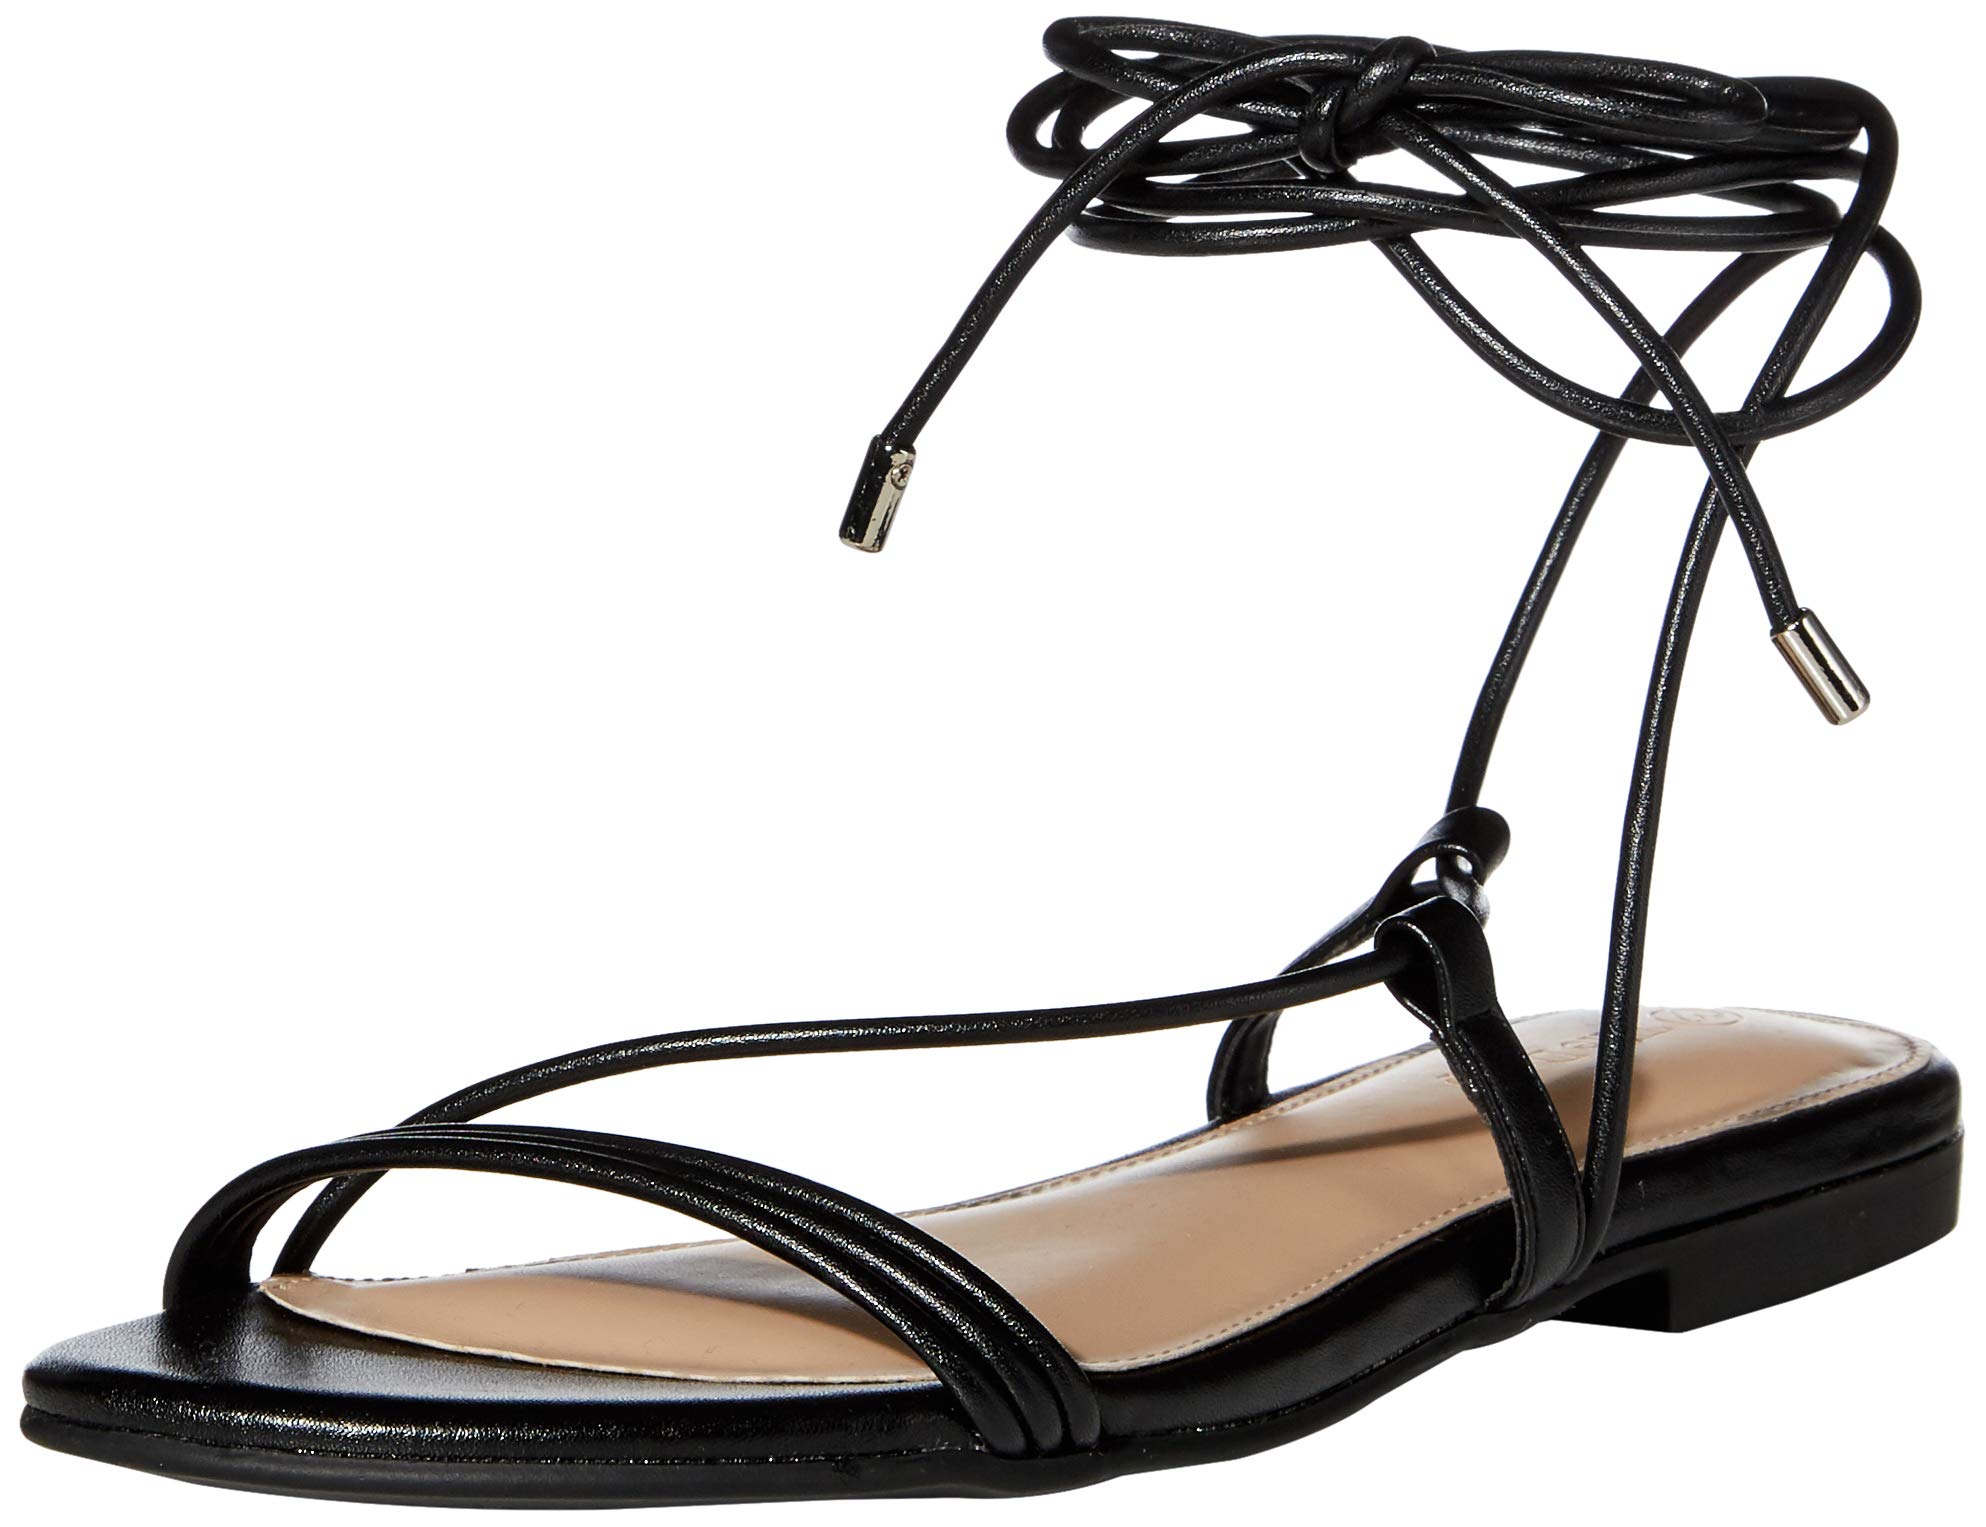 The Drop Women's Samantha Flat Strappy Lace-Up Sandal